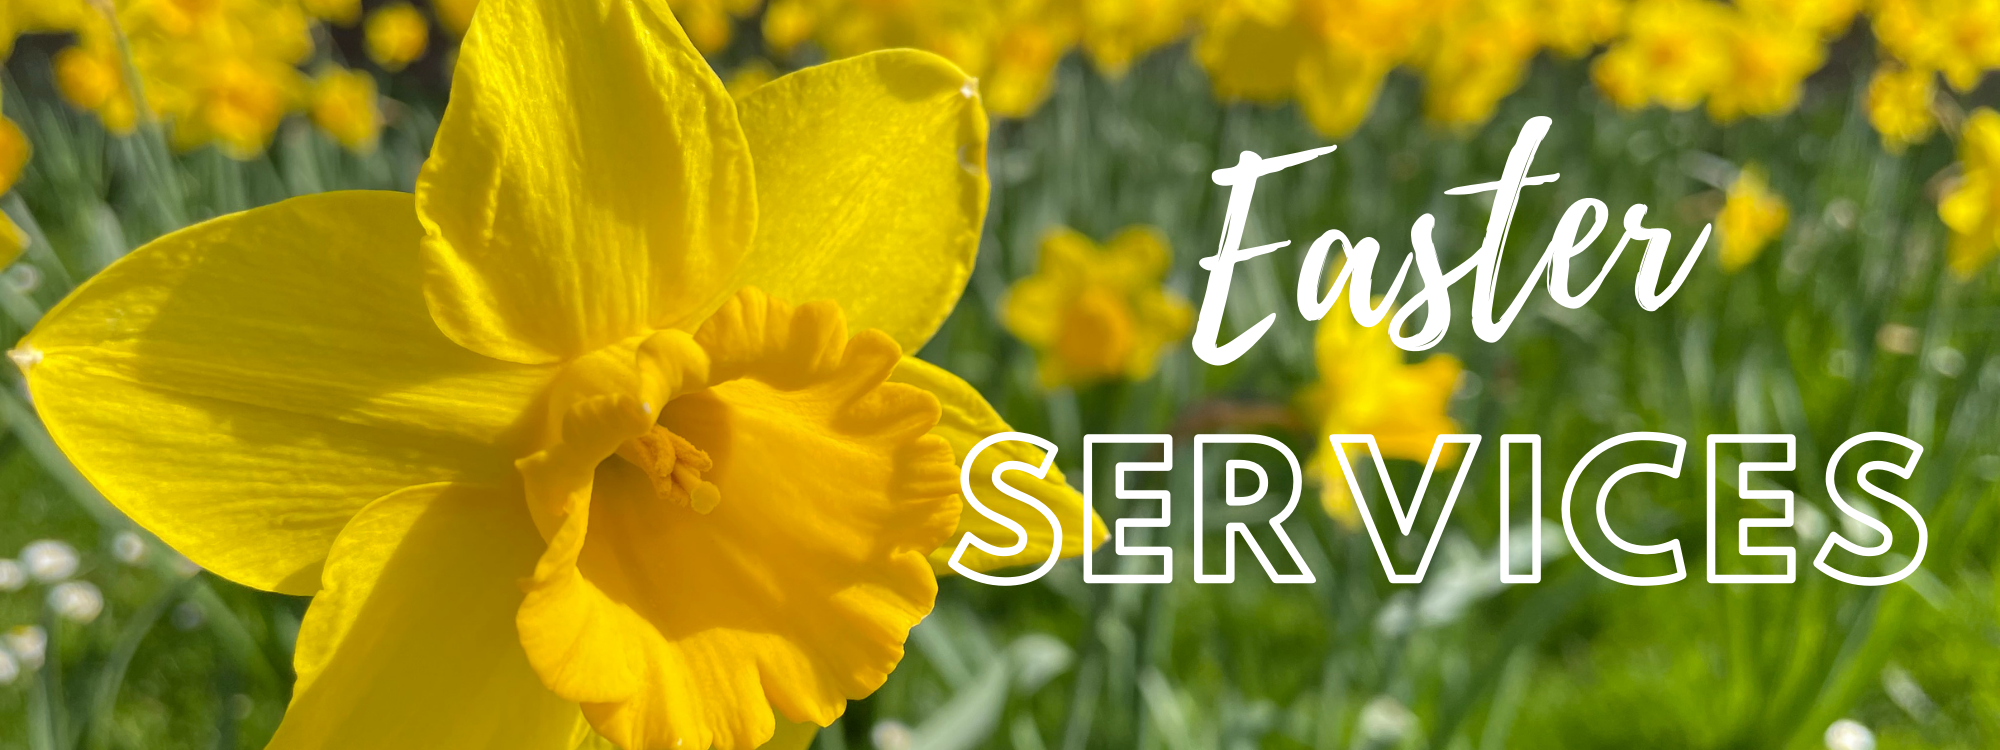 Easter Services Banner